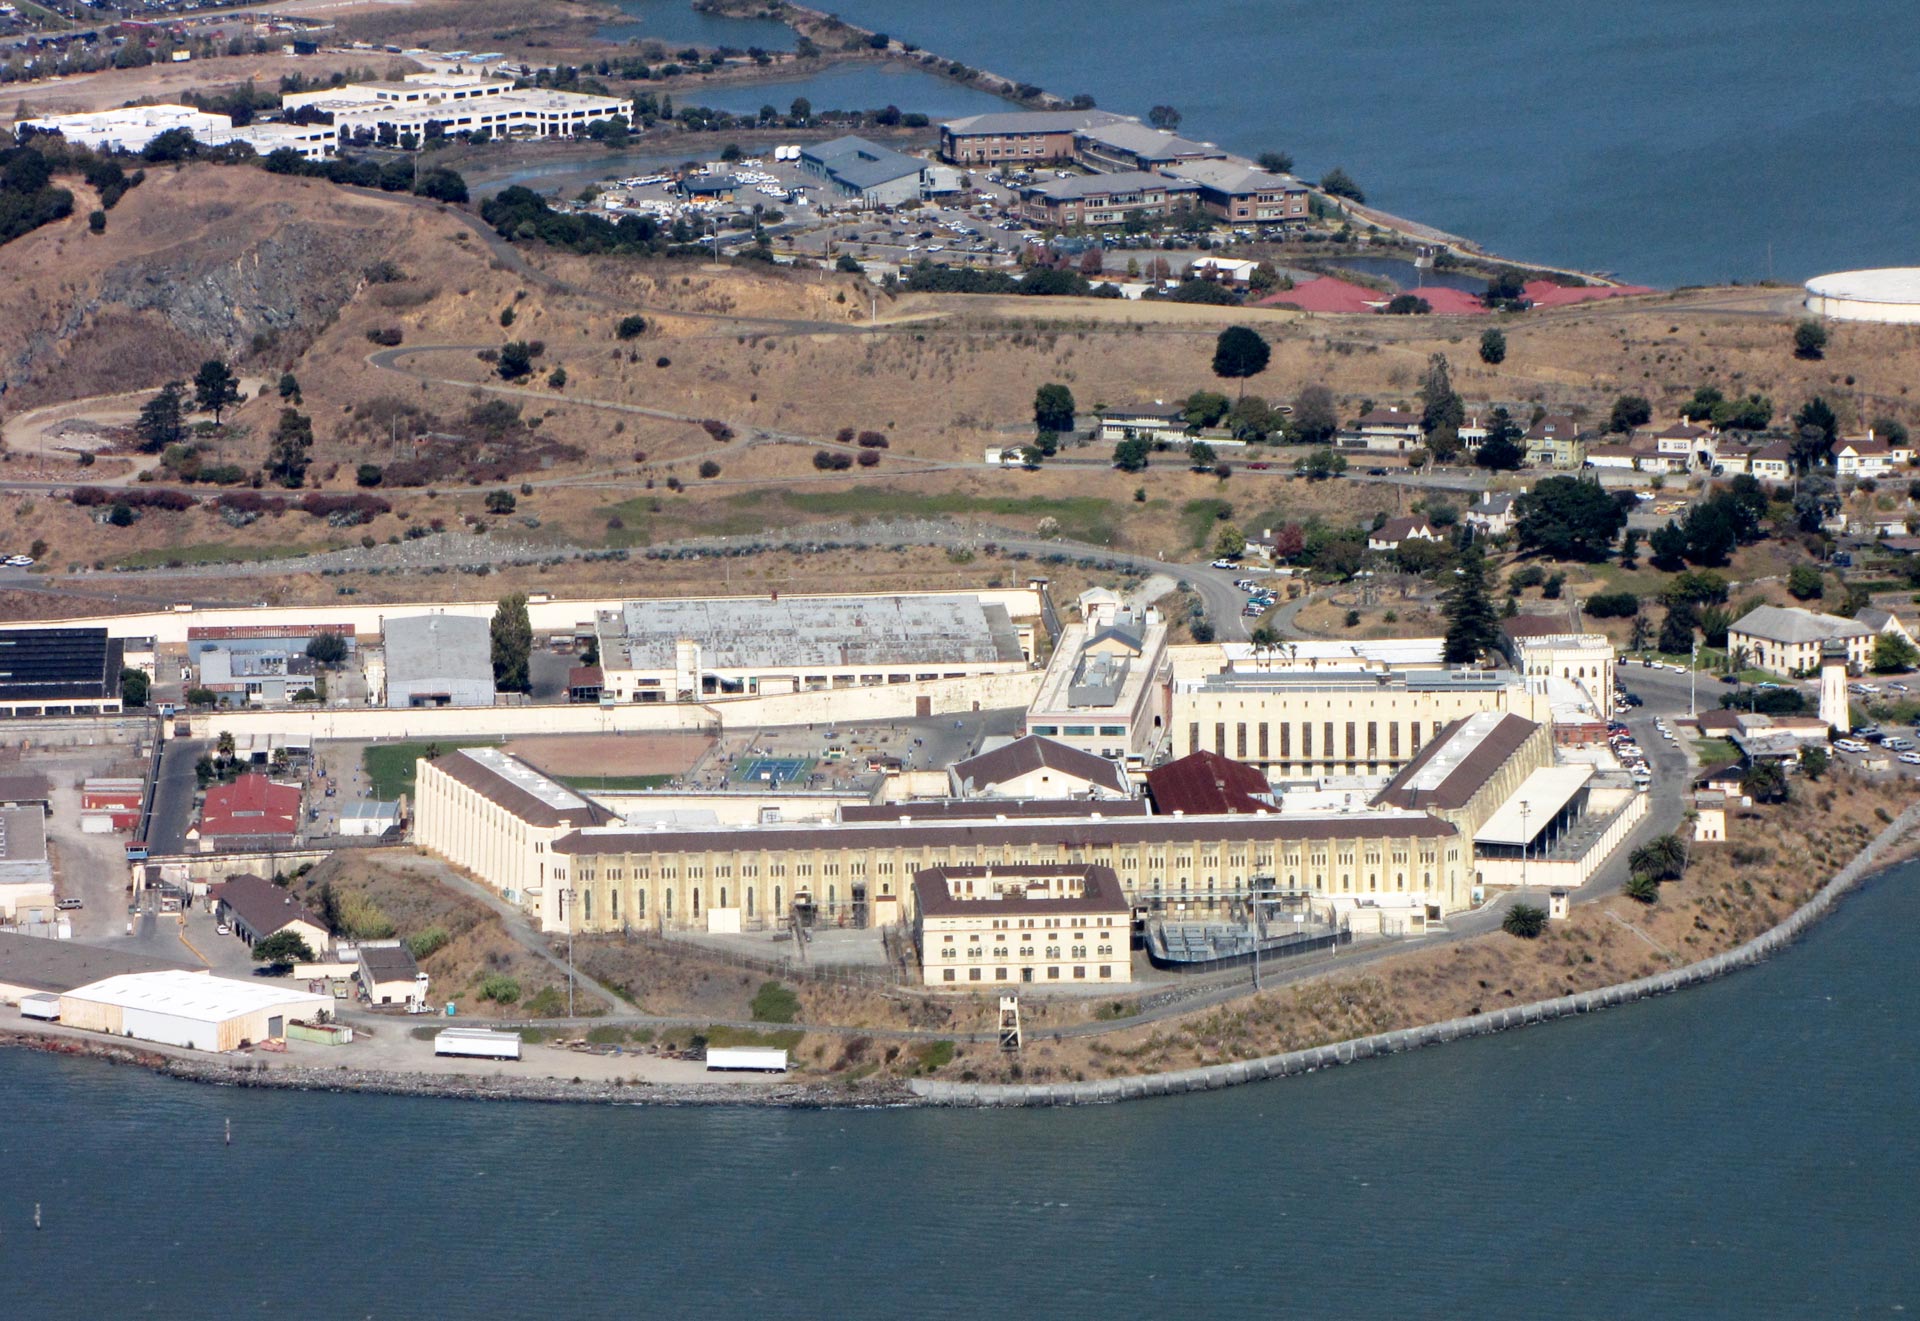 San Quentin Prison, where more than 700 men on death row are housed.